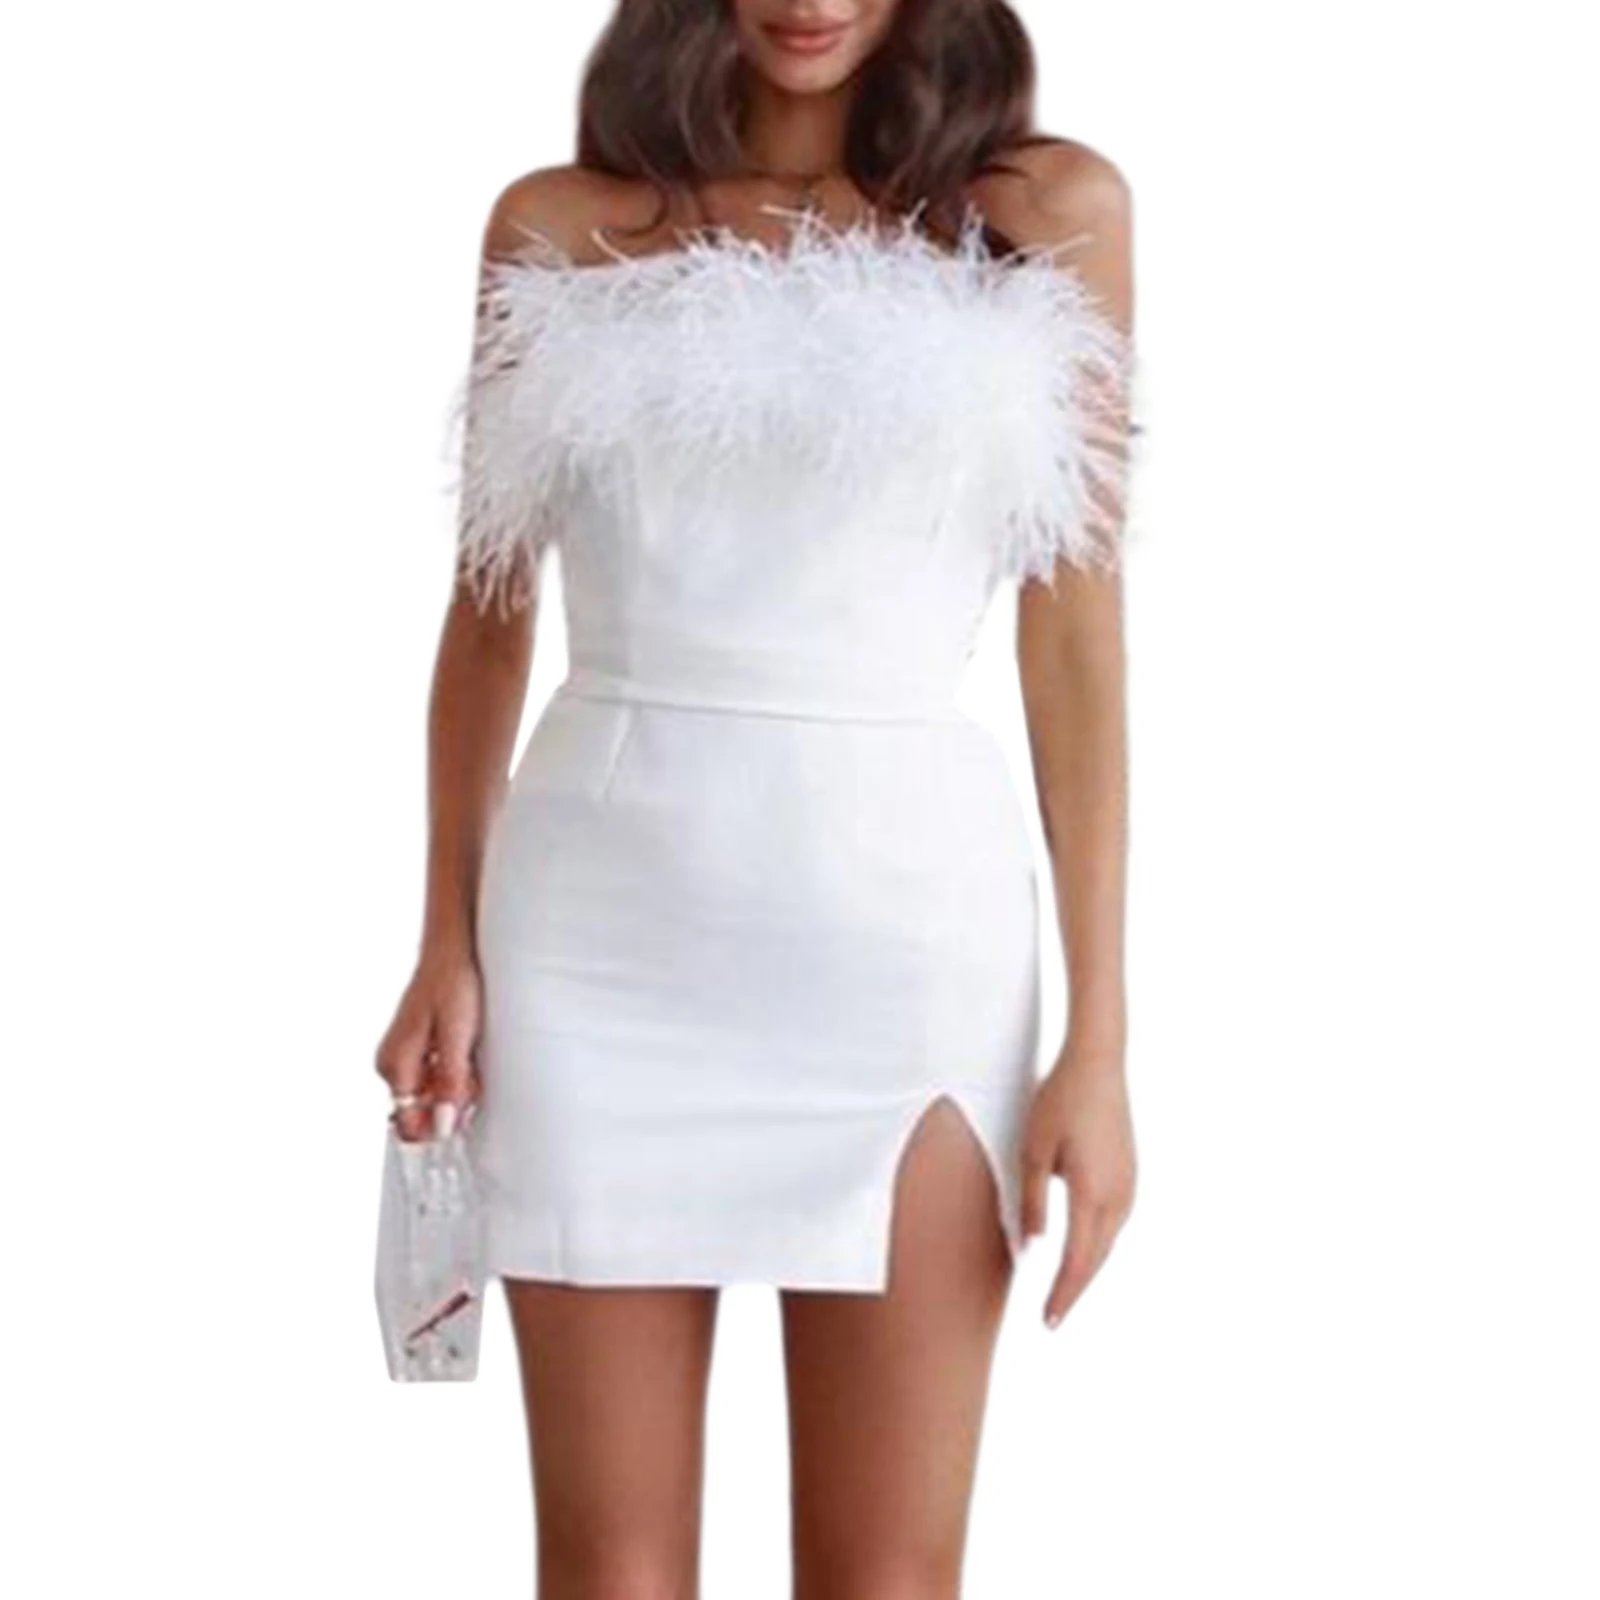 Female Bodycon Dress Summer Solid Color Feathers Boat Neck Sleeveless Sexy Birthday Party White Dress Women Mini Dress